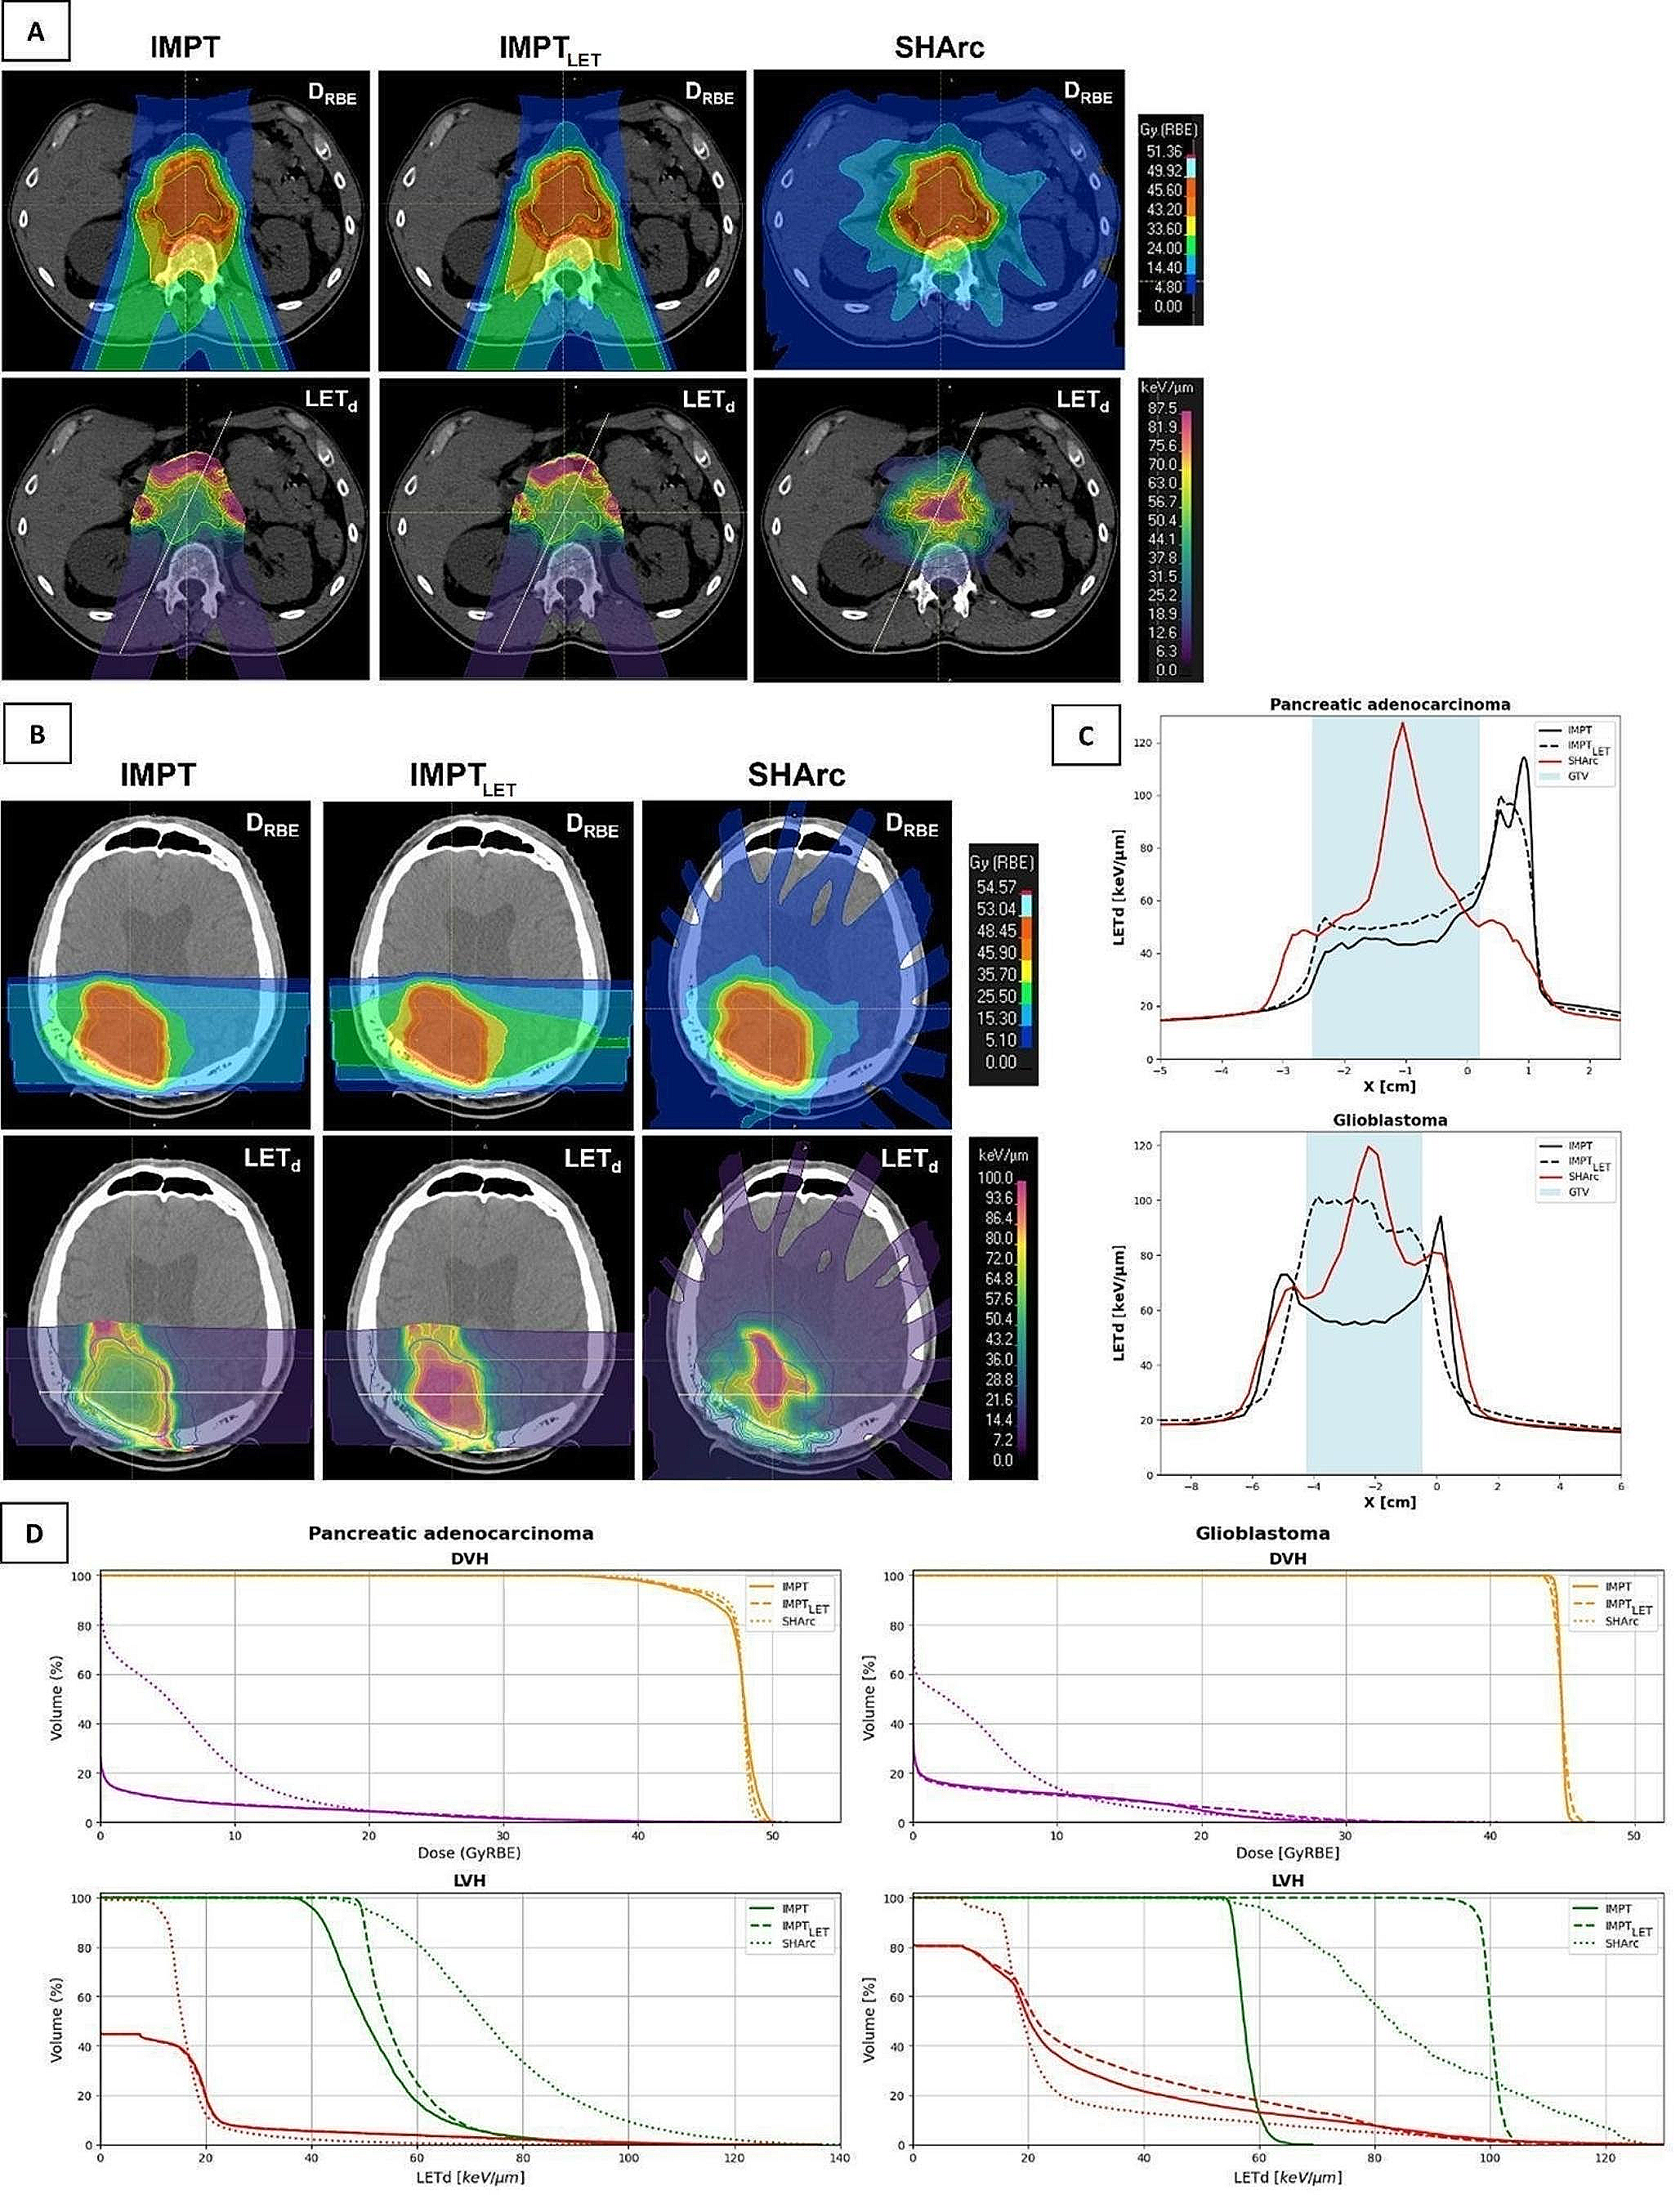 Innovative approaches to enhance high-LETd tumor targeting in carbon ion radiotherapy